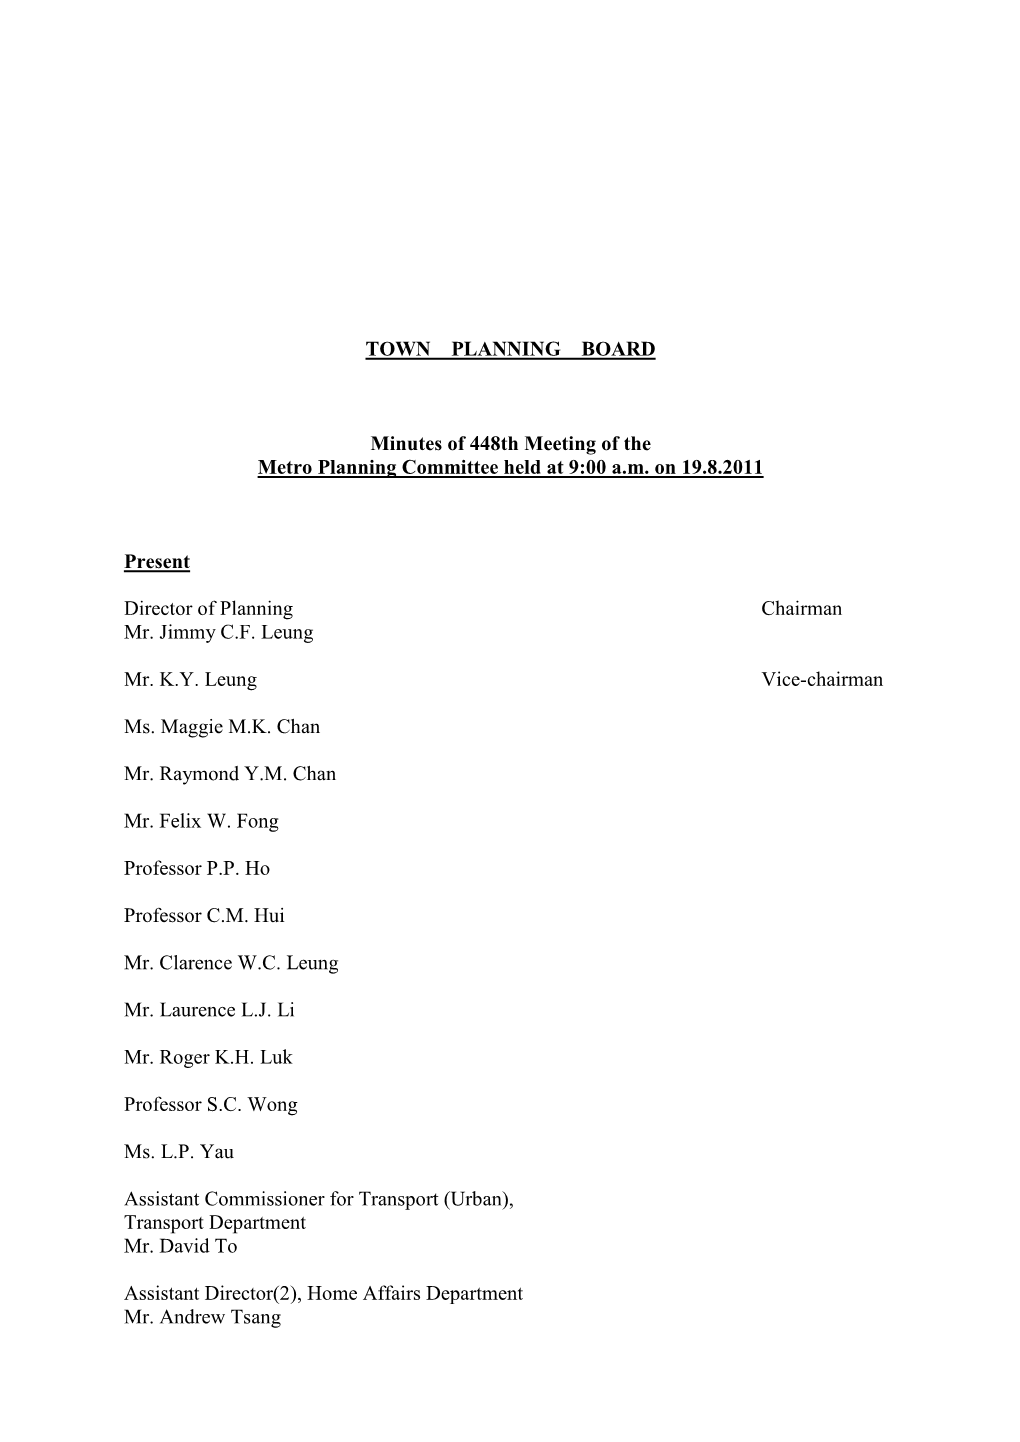 TOWN PLANNING BOARD Minutes of 448Th Meeting of the Metro